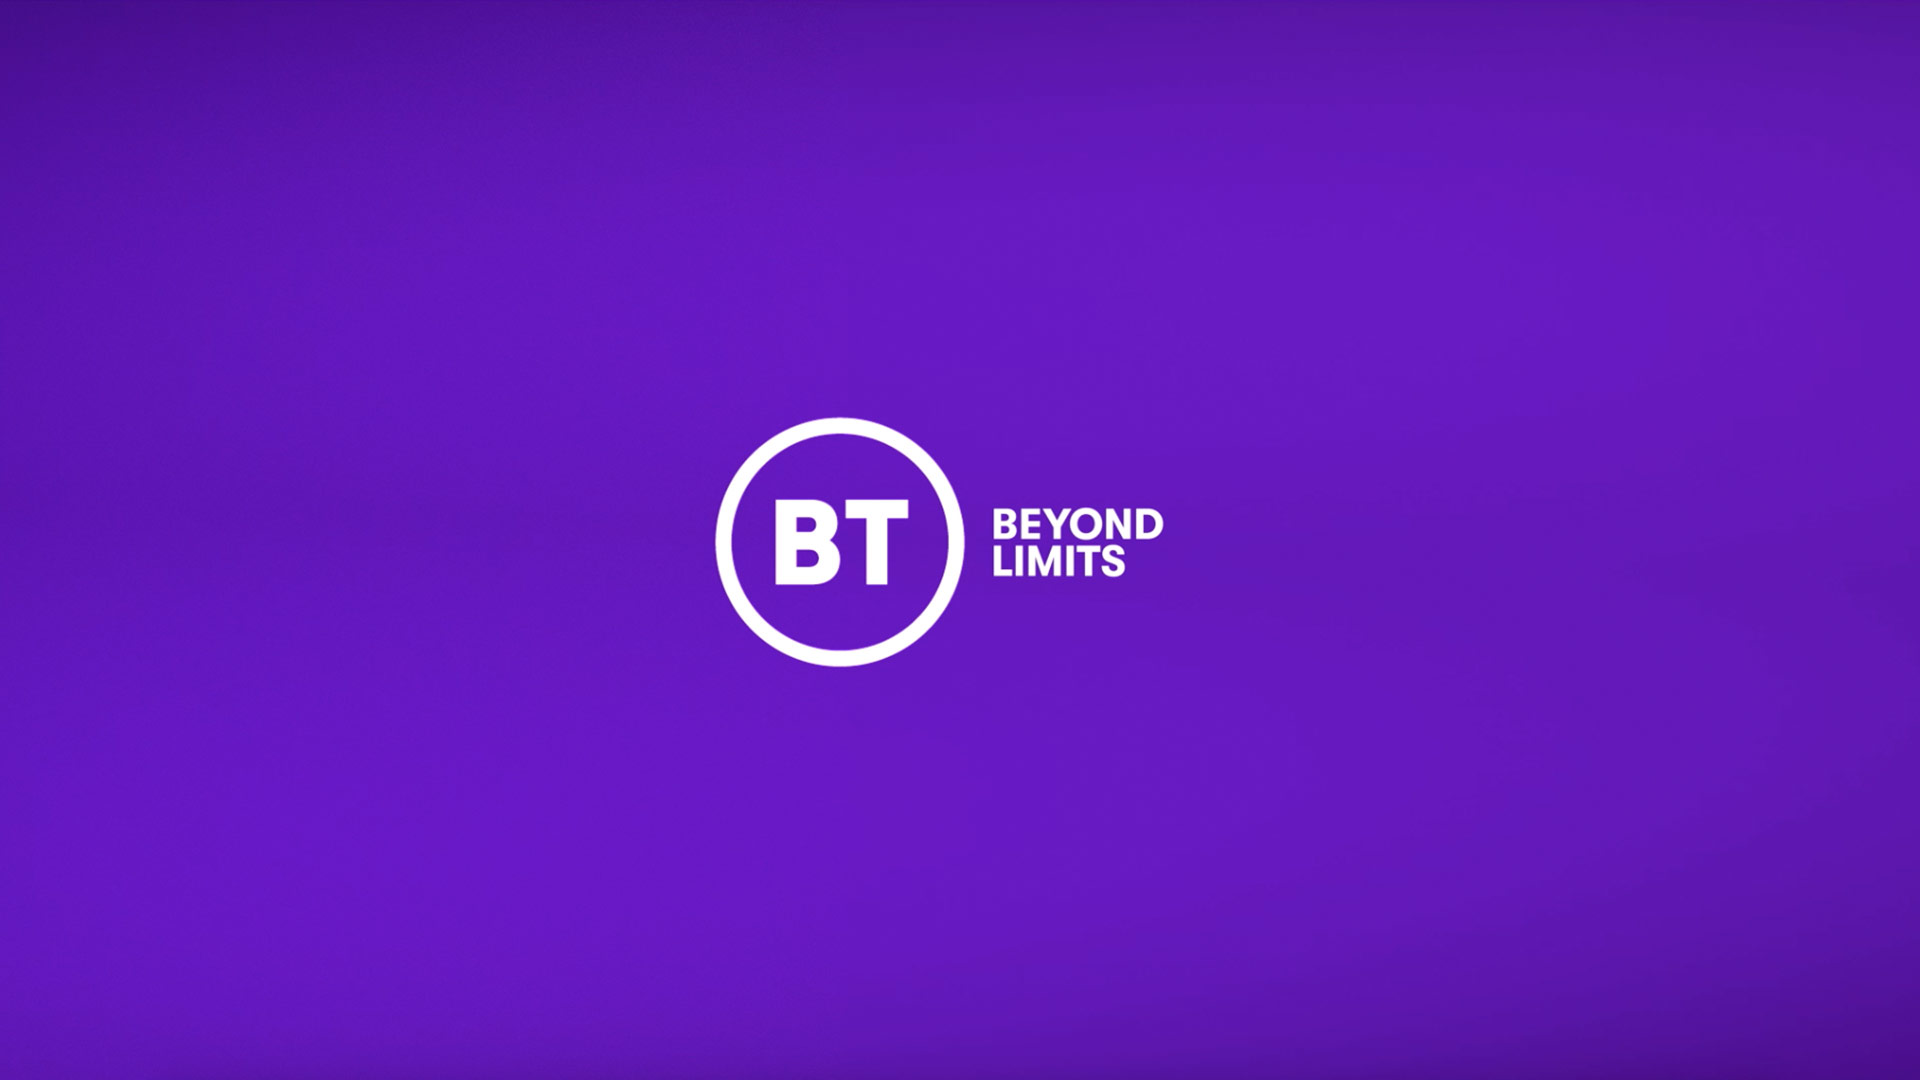 New BT logo following the BT rebrand and text reading beyond limits.